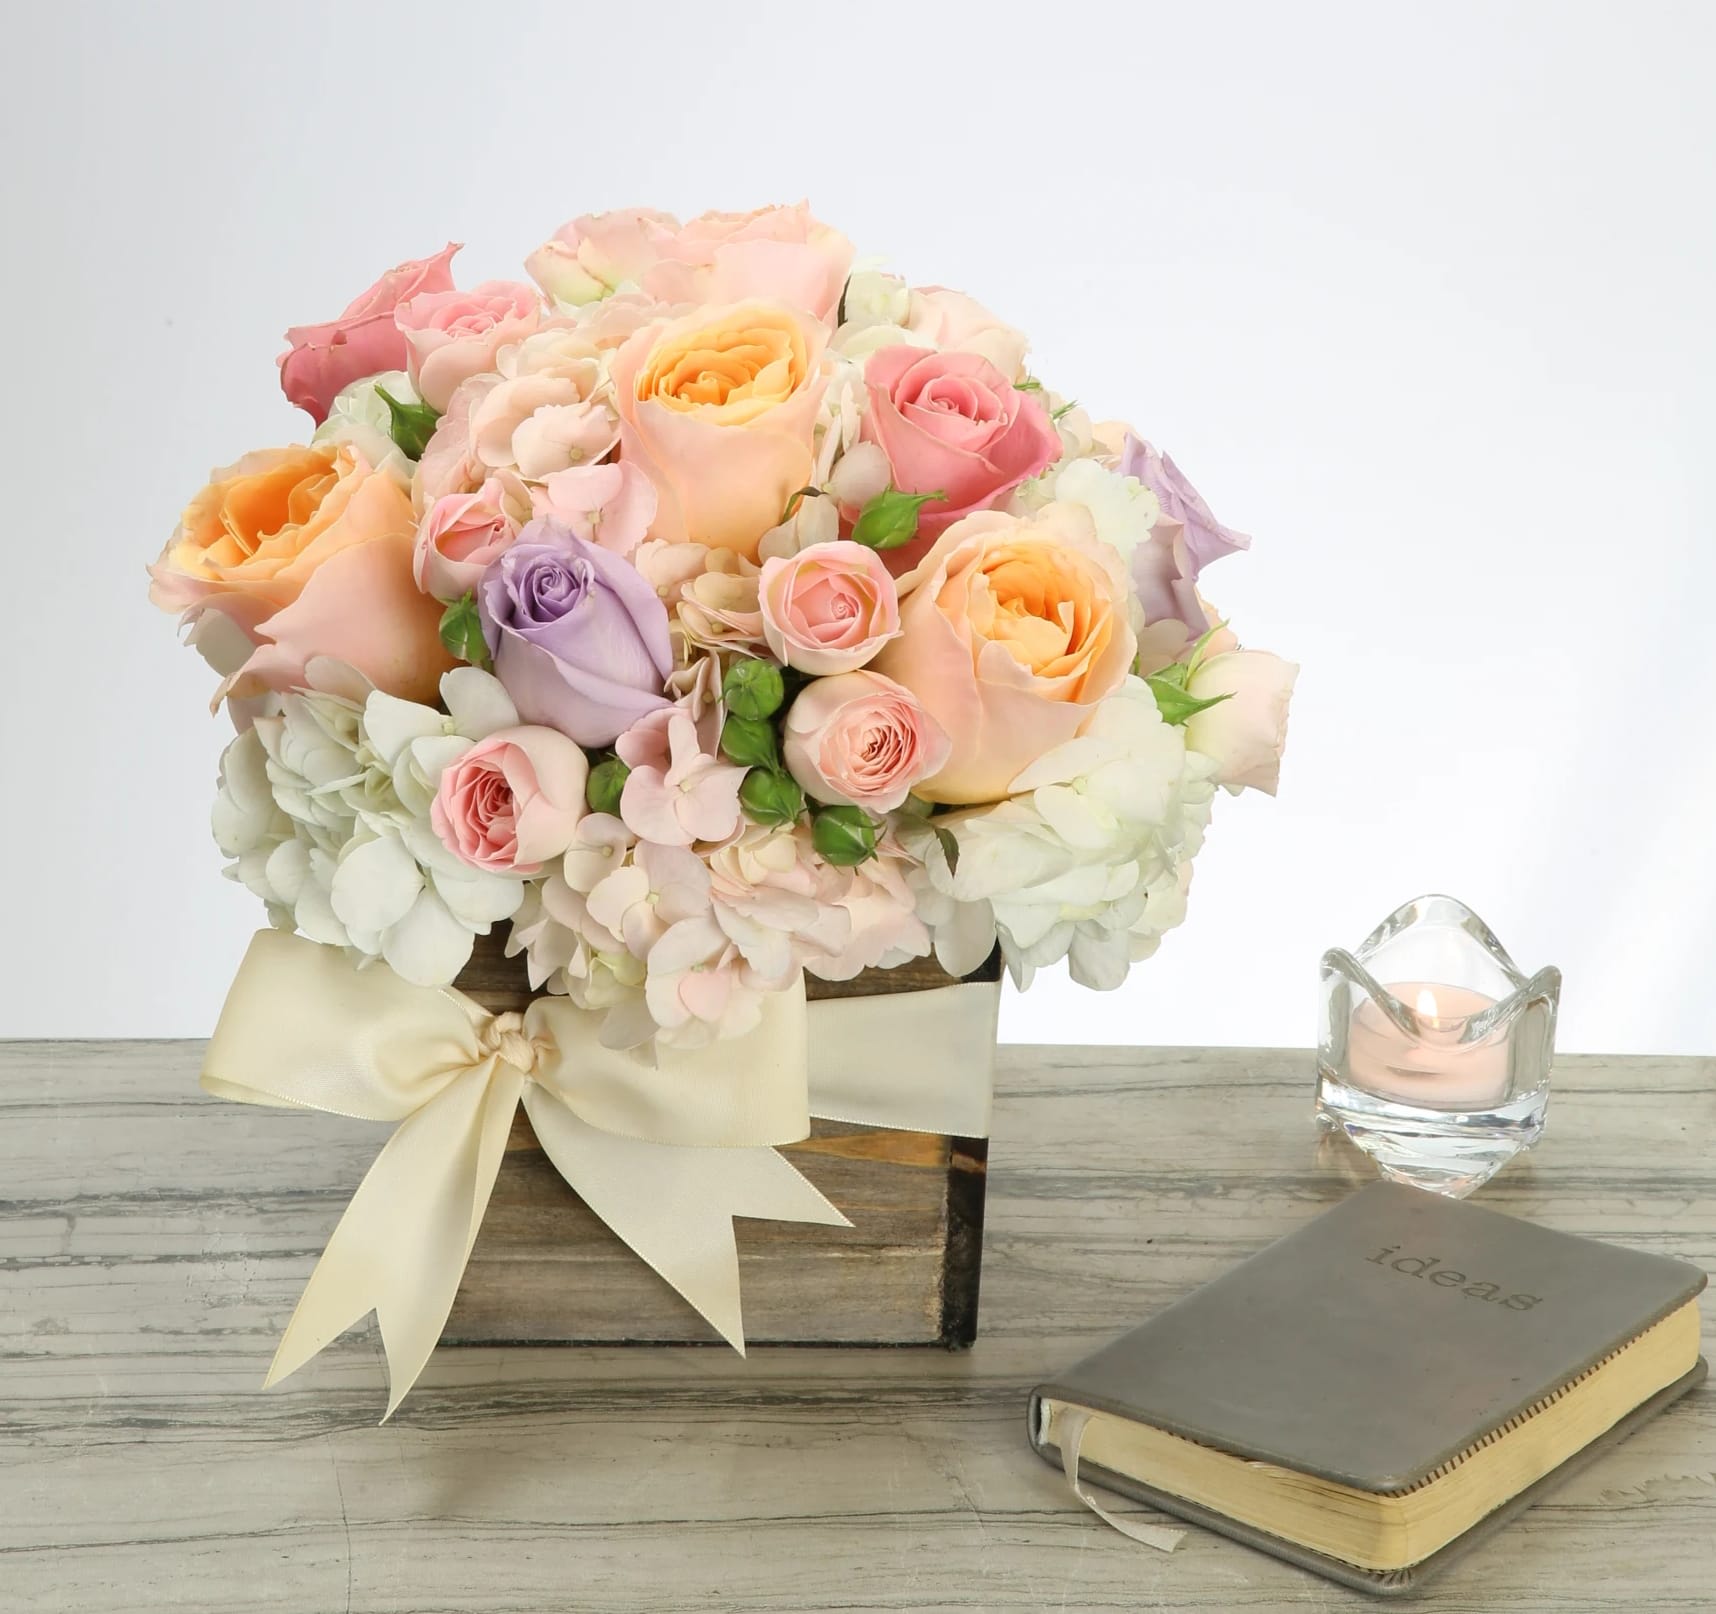 Pastel Perfection - Soft luscious pastel South American roses, embraced by Dutch Hydrangeas and a sprinkling of seasonal flowers make this delightful design one of calm and fragrant beauty. The custom bow tied around the box base puts the finishing touch on this lovely arrangement that will have everyone saying OMG!  Standard: Approx. 8&quot;  in a 6 X 6 Container Deluxe: Approx. 12&quot; in a 6 X 6 Container Premium: Approx. 16&quot; in a 8 X 8 Container